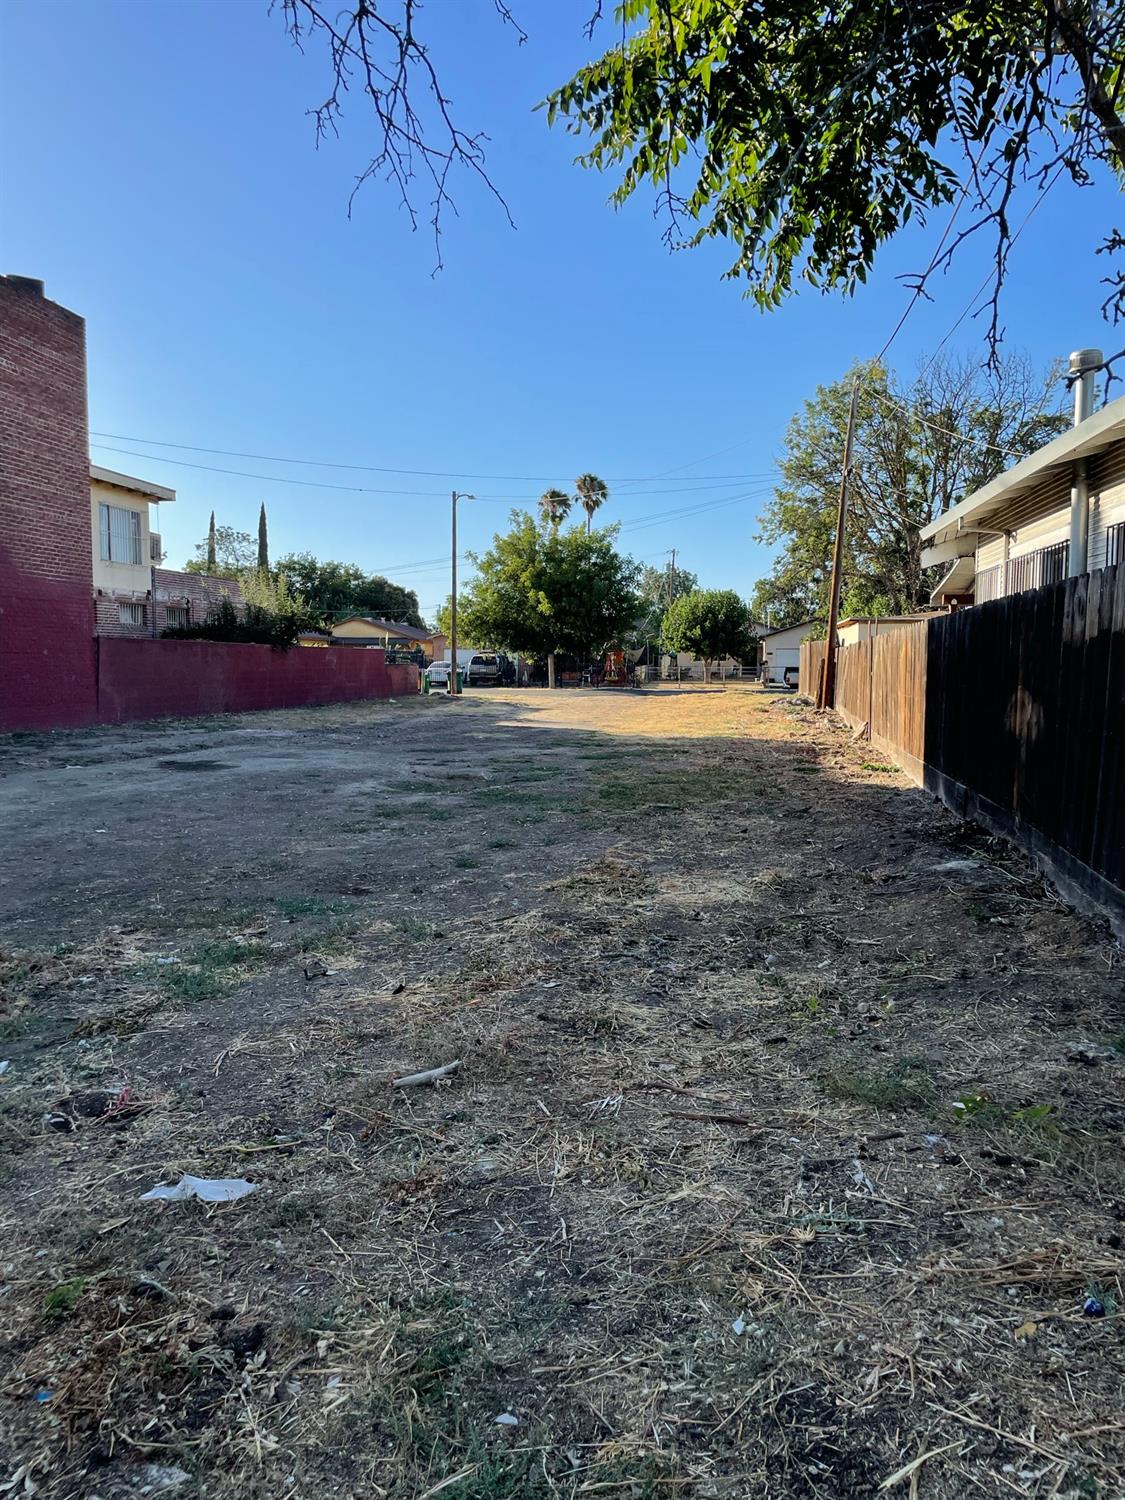 Commercial lot, with 7,000 square feet of space to build! On Main Street, down the street from public transportation, restaurants, salons, etc! Near the freeway for easy access.